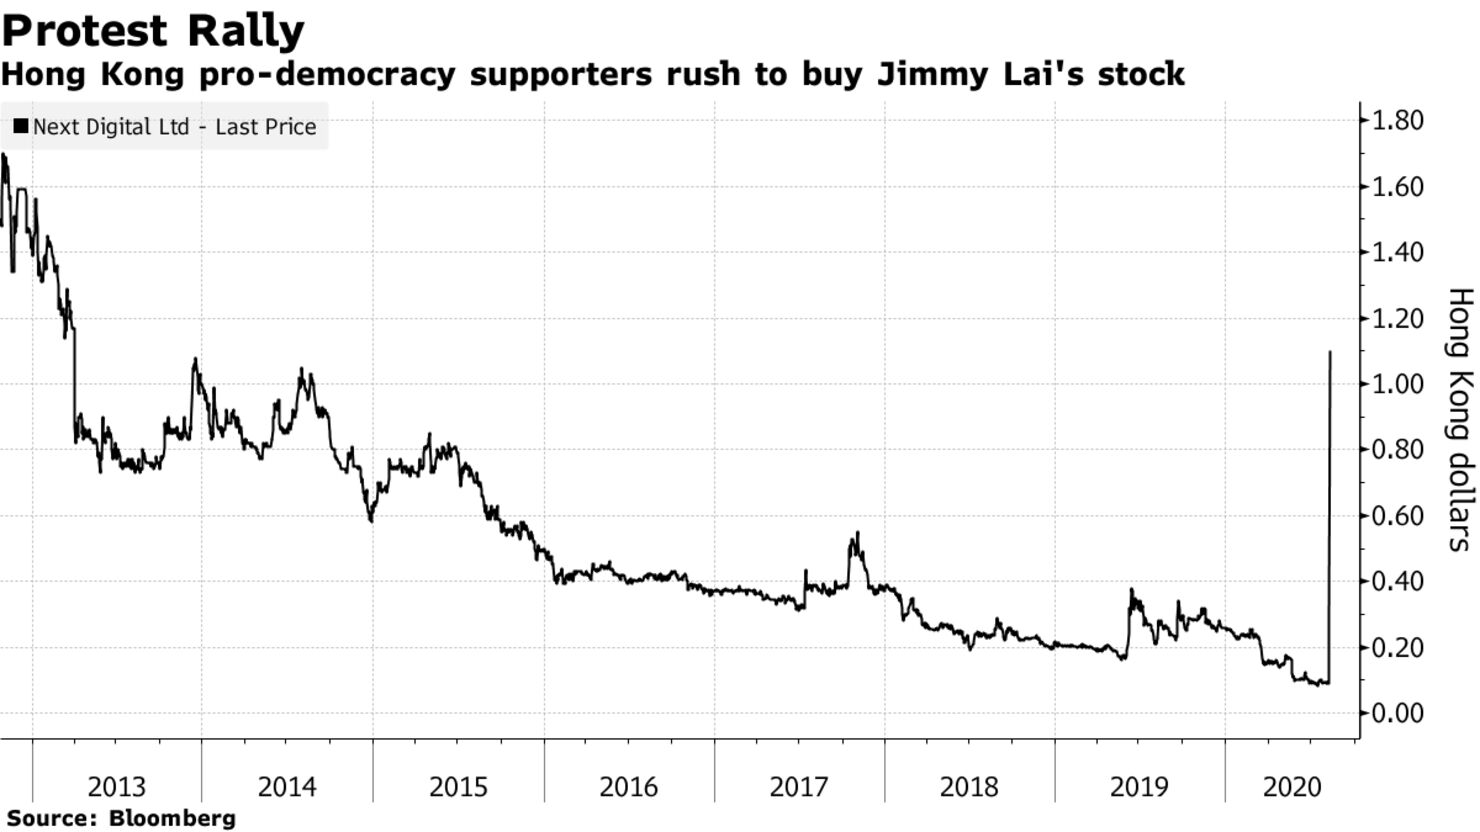 Hong Kong pro-democracy supporters rush to buy Jimmy Lai's stock